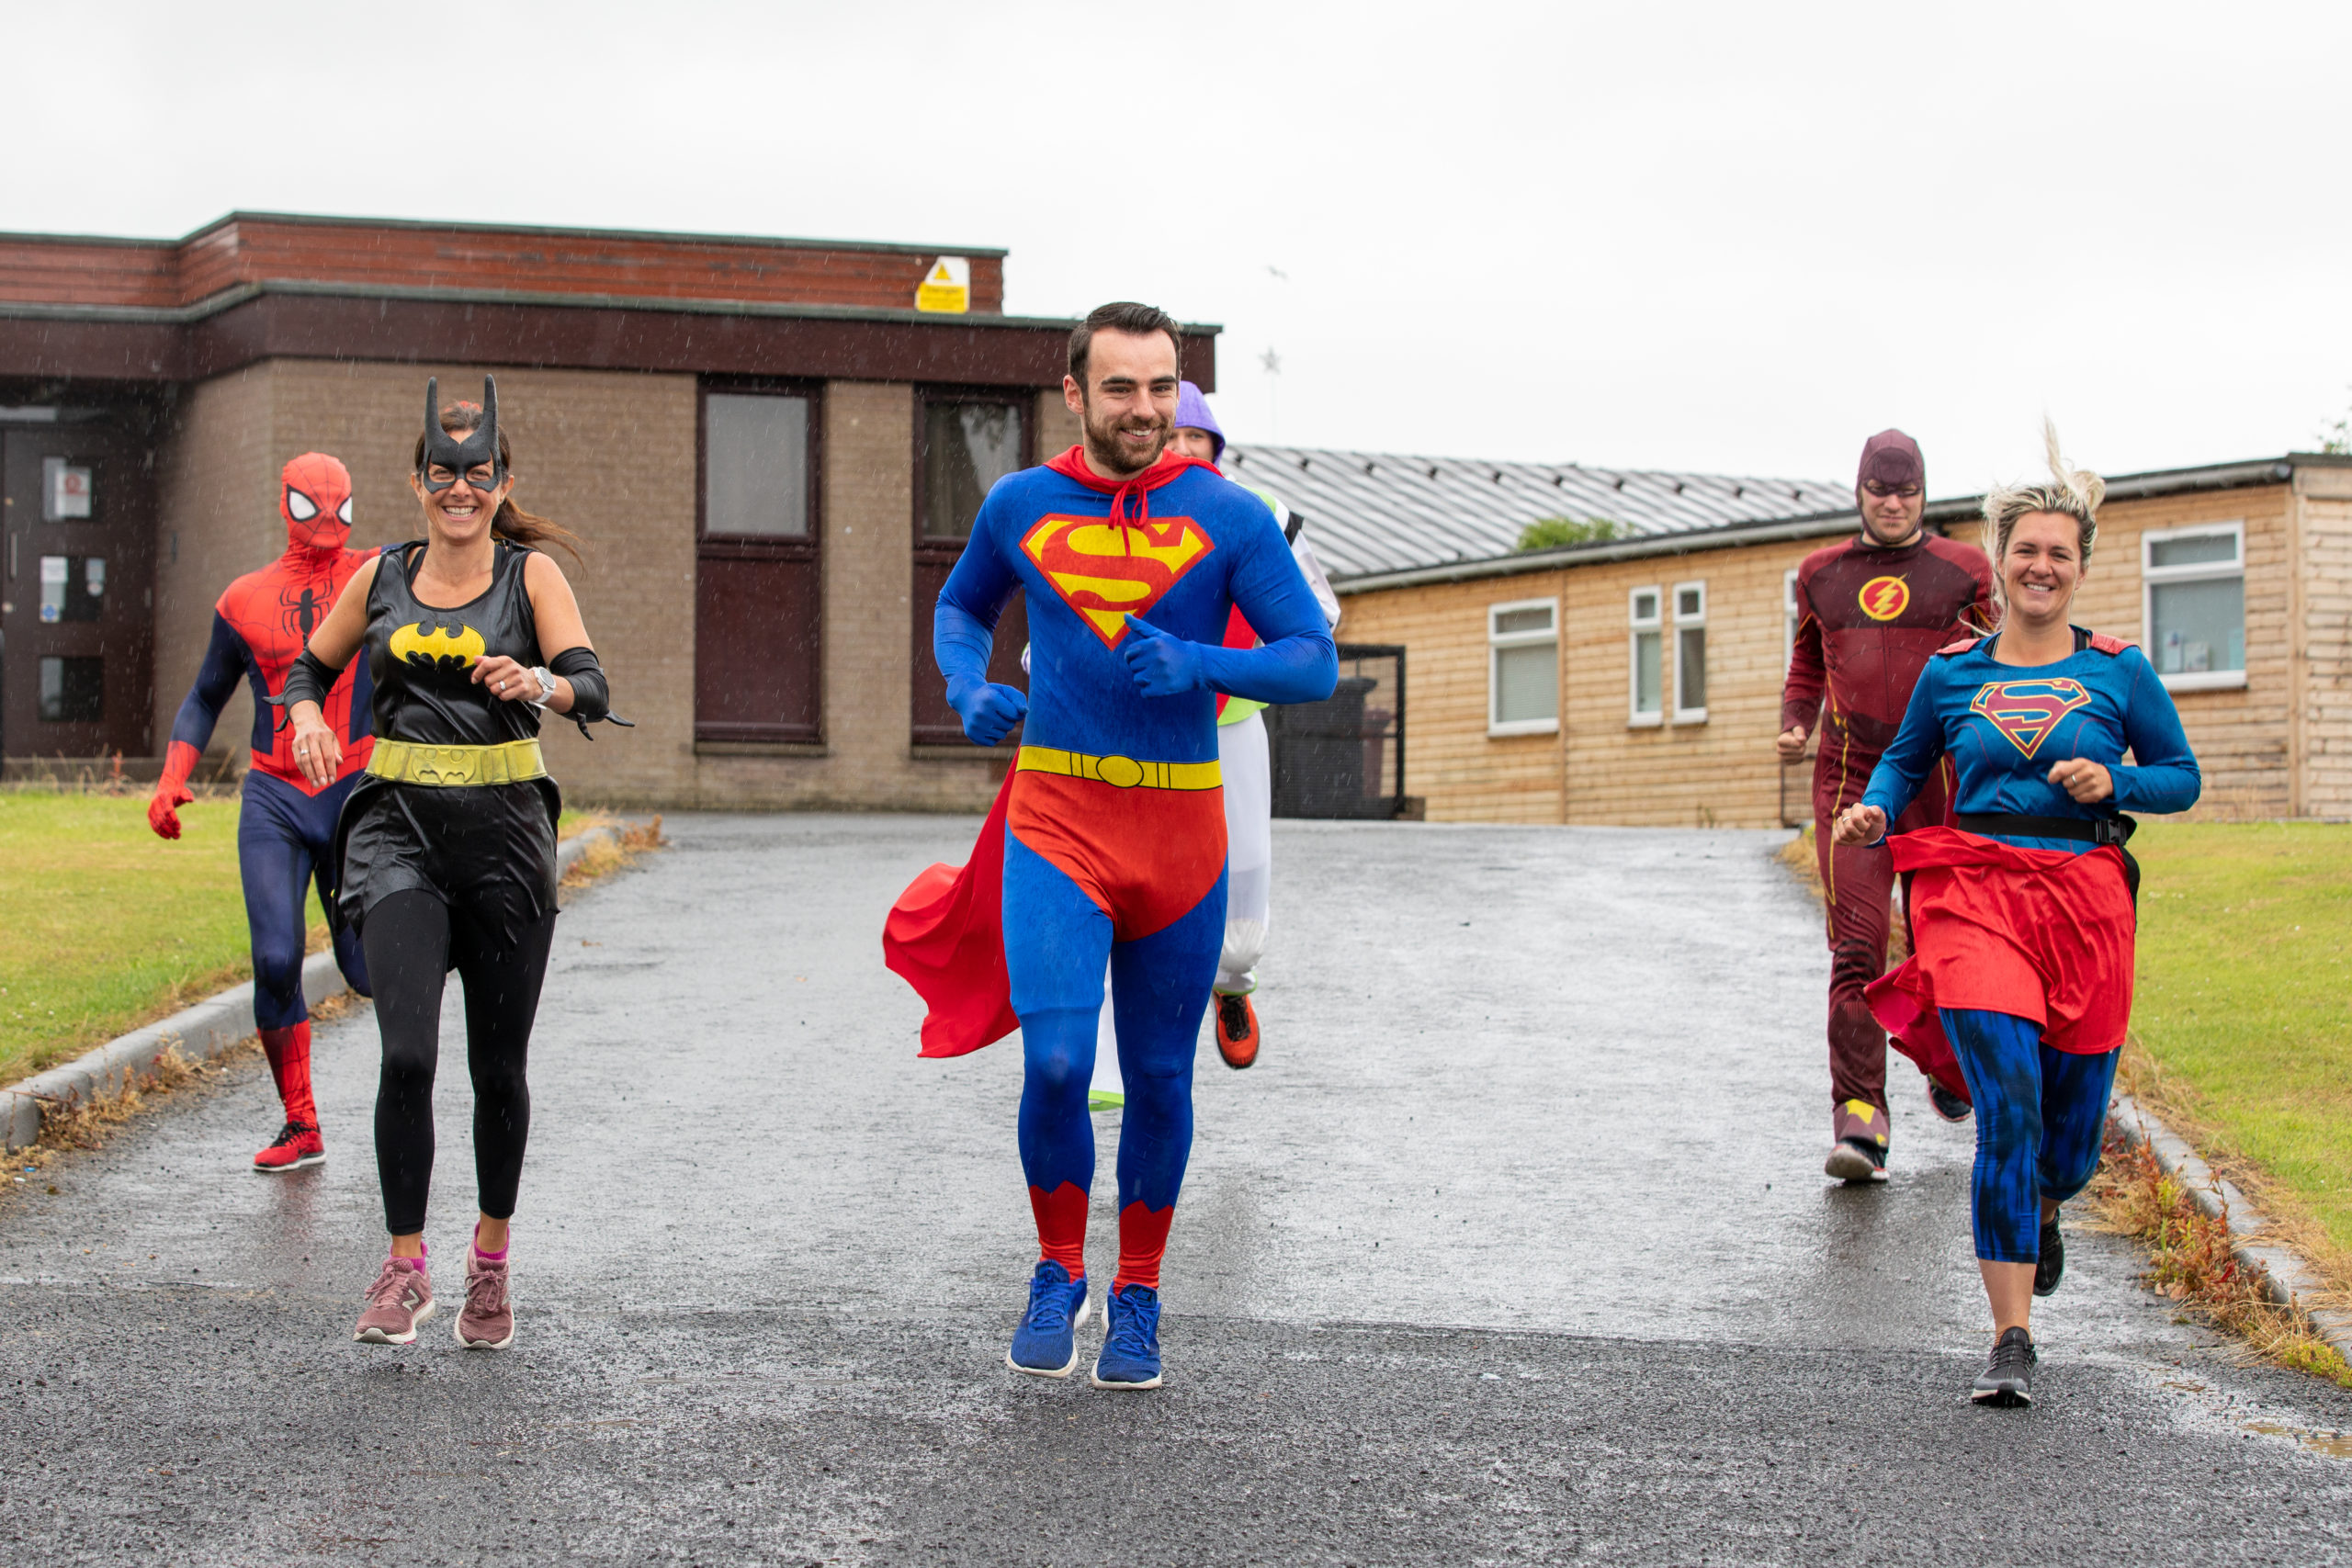 Fife's latest superheroes in action